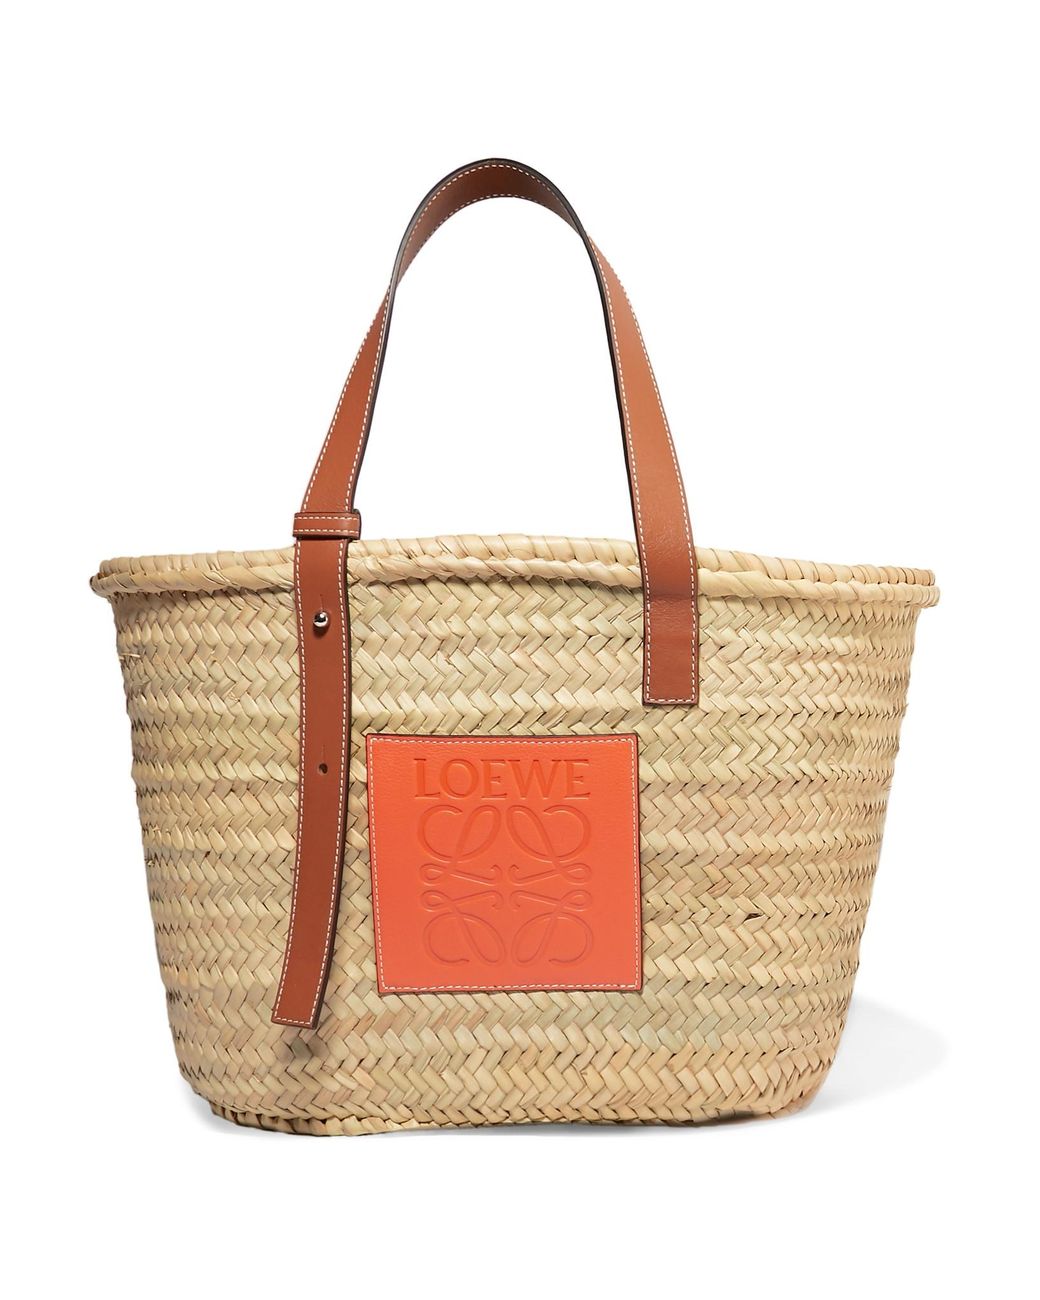 Lyst - Loewe Paula's Ibiza Large Leather-trimmed Woven Raffia Tote in ...